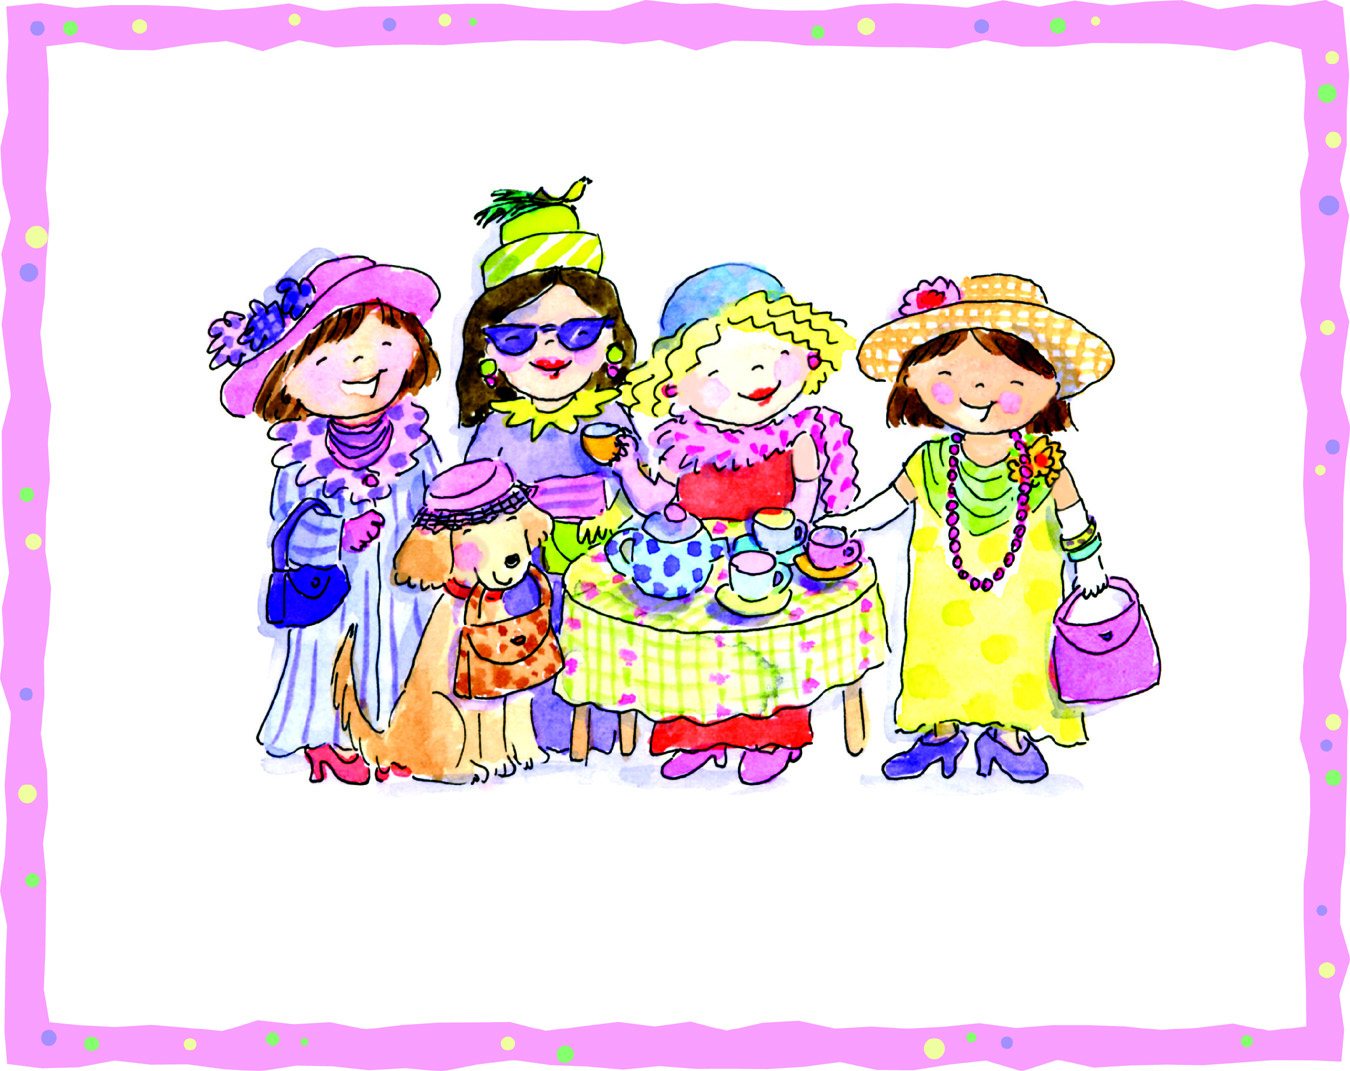 A cartoon image of "Dress Up Girls Birthday Party Invitations" with hats and a dog.